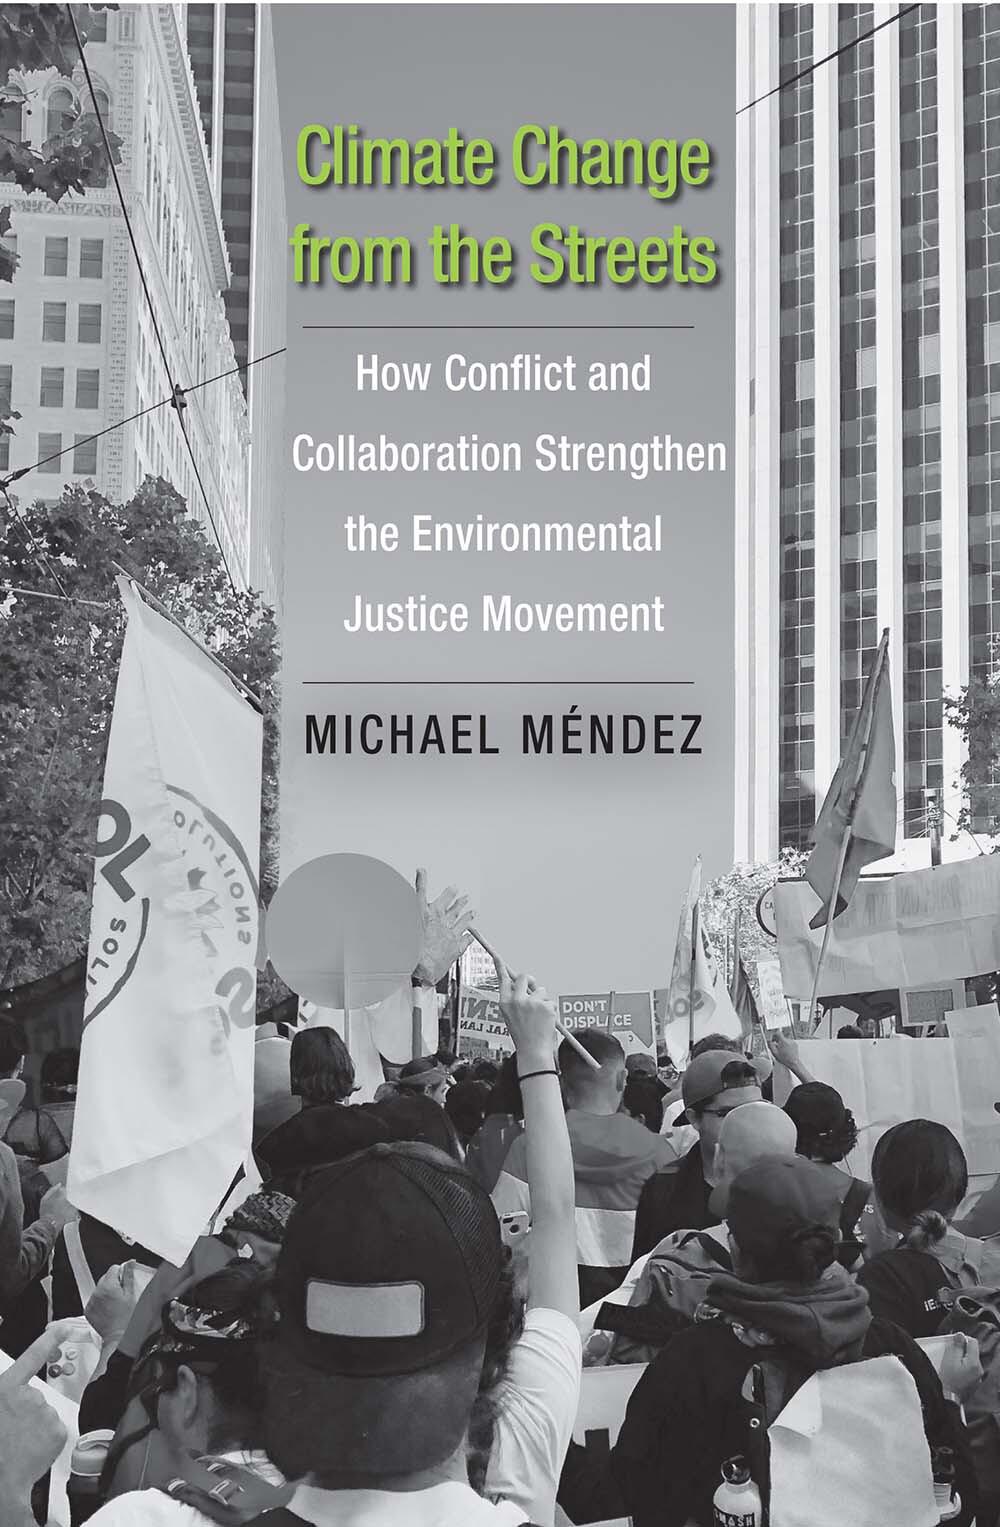 Climate Change from the Streets: How Conflict and Collaboration Strengthen the Environmental Justice Movement